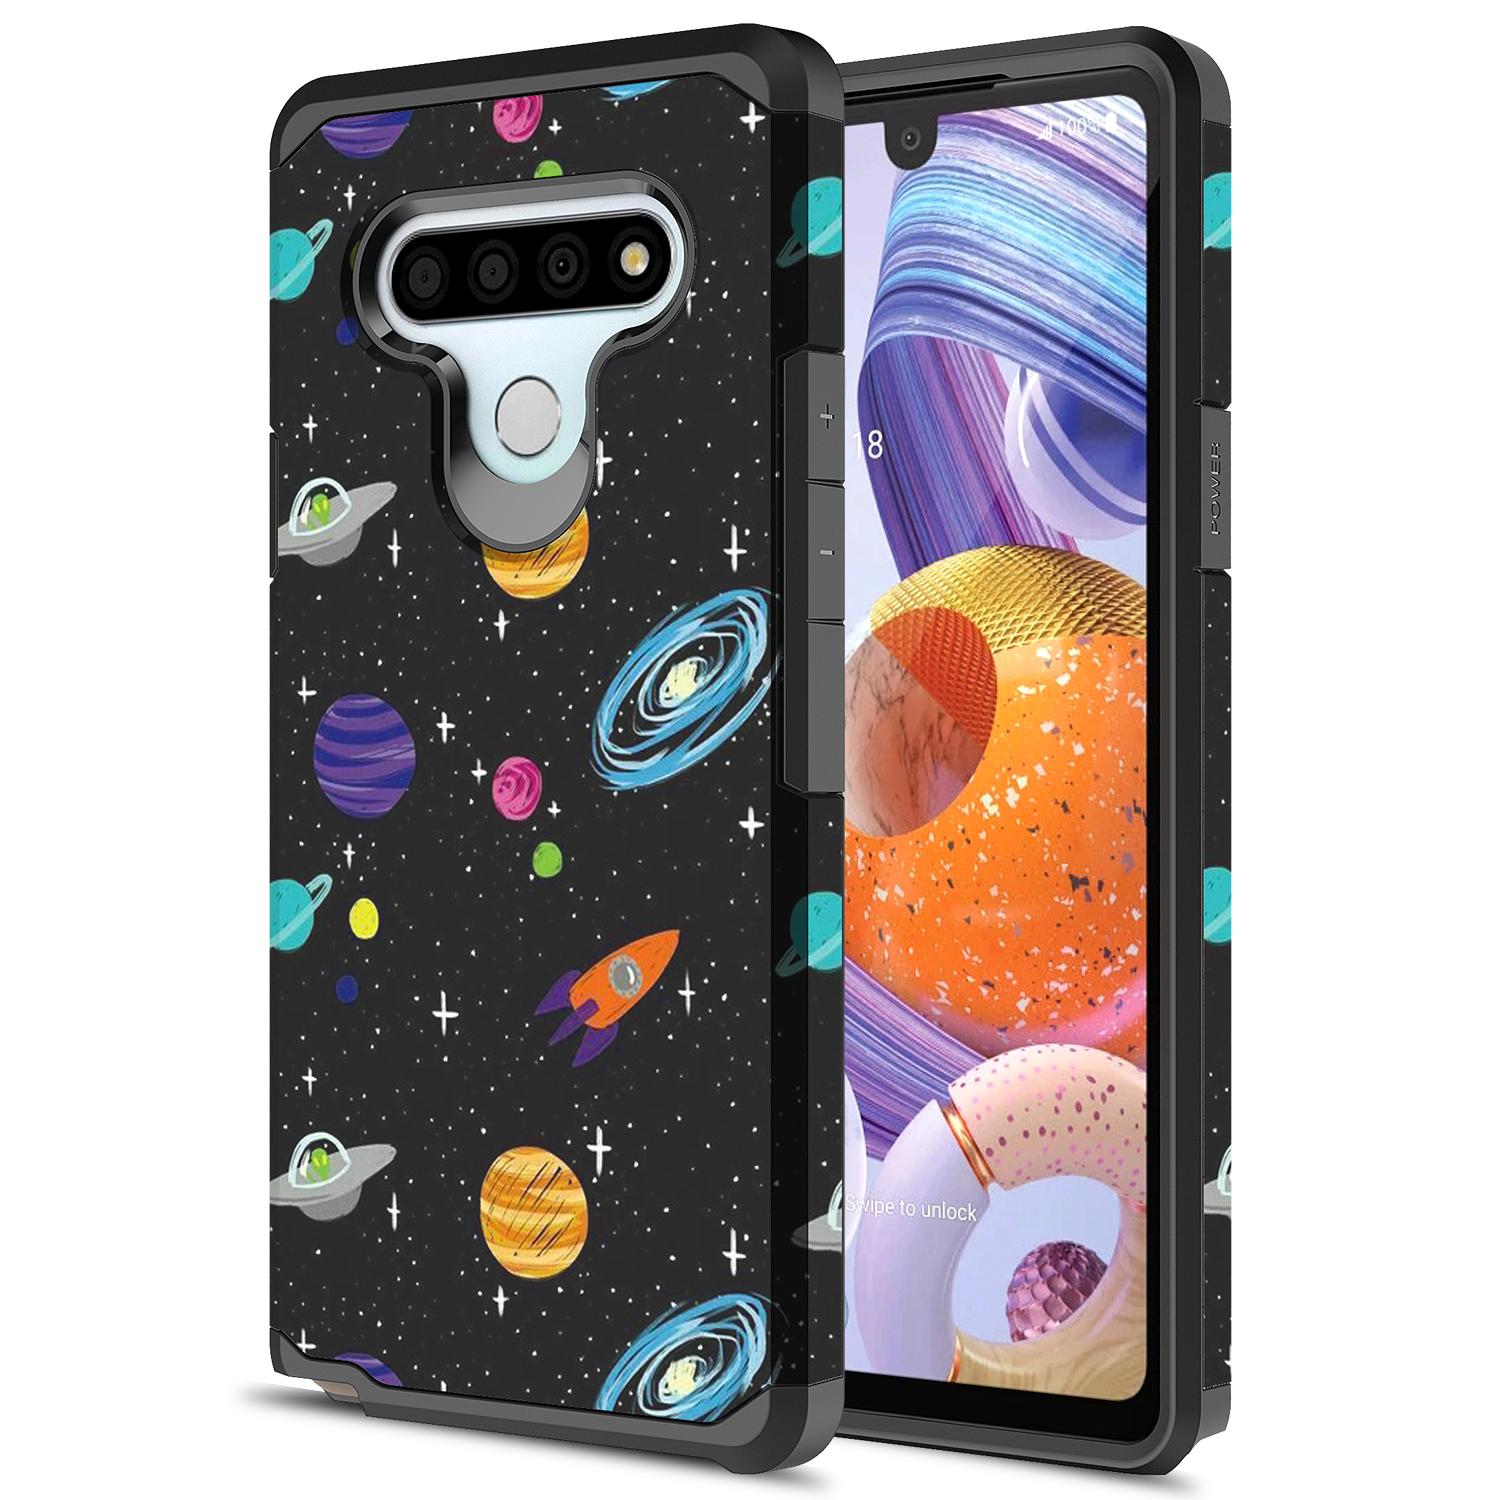 LG Stylo 6 Case, LG Stylo 6+ Case, KAESAR Hybird Drop Protection Sleek Slim Dual Layer Shockproof Colorful Graphic Armor Case For LG Stylo 6 / LG Stylo 6 Plus (Space) - image 1 of 5